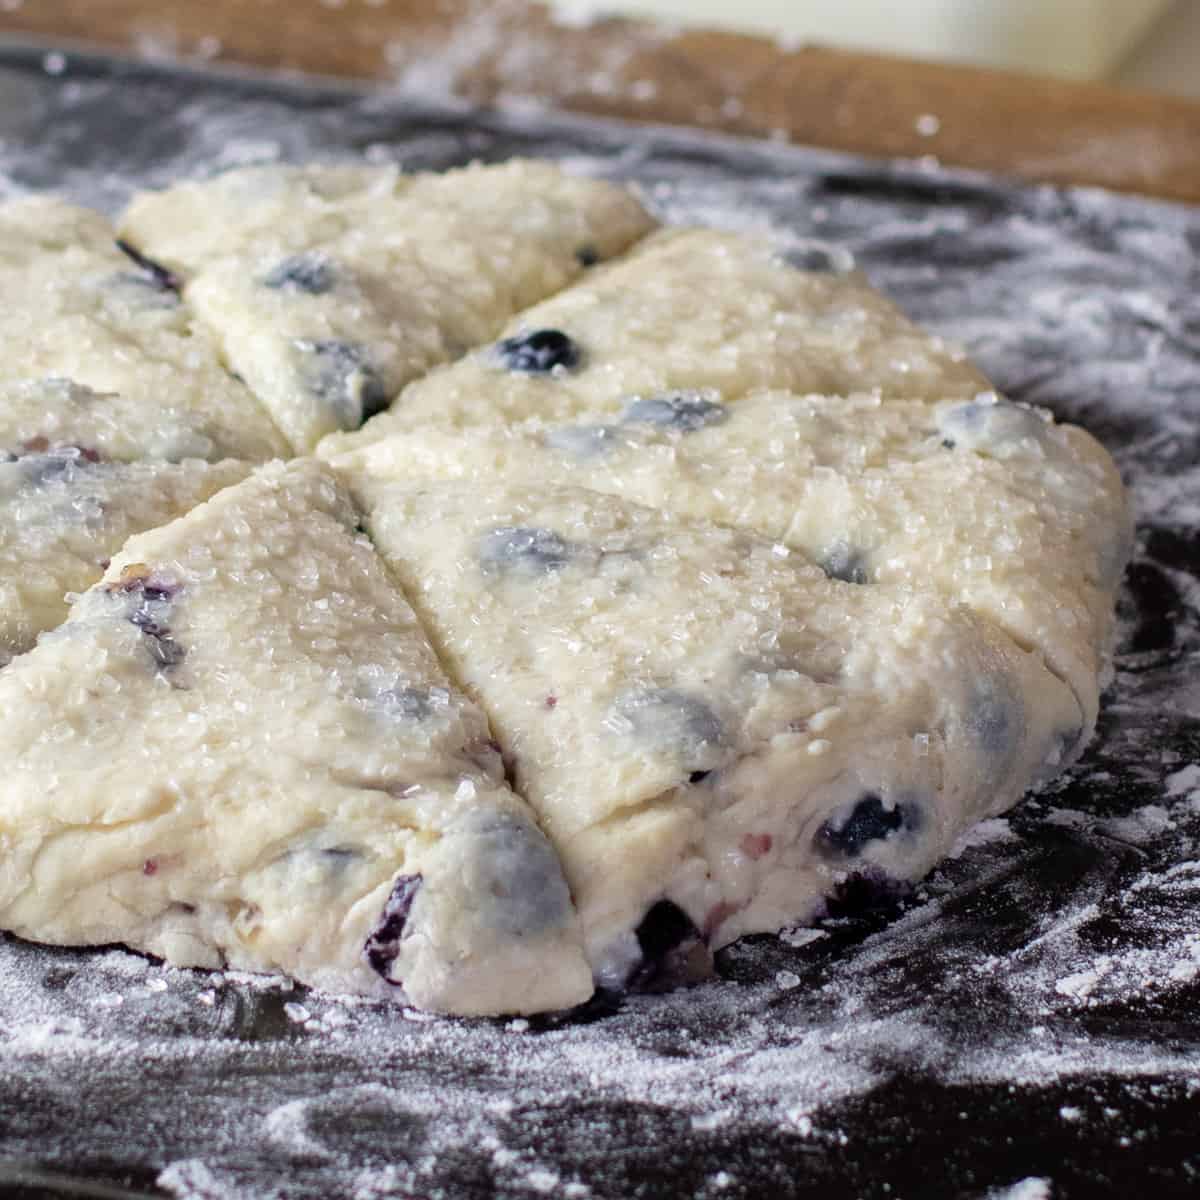 Scone dough that has been shaped into a round disc and sprinkled with coarse sugar.